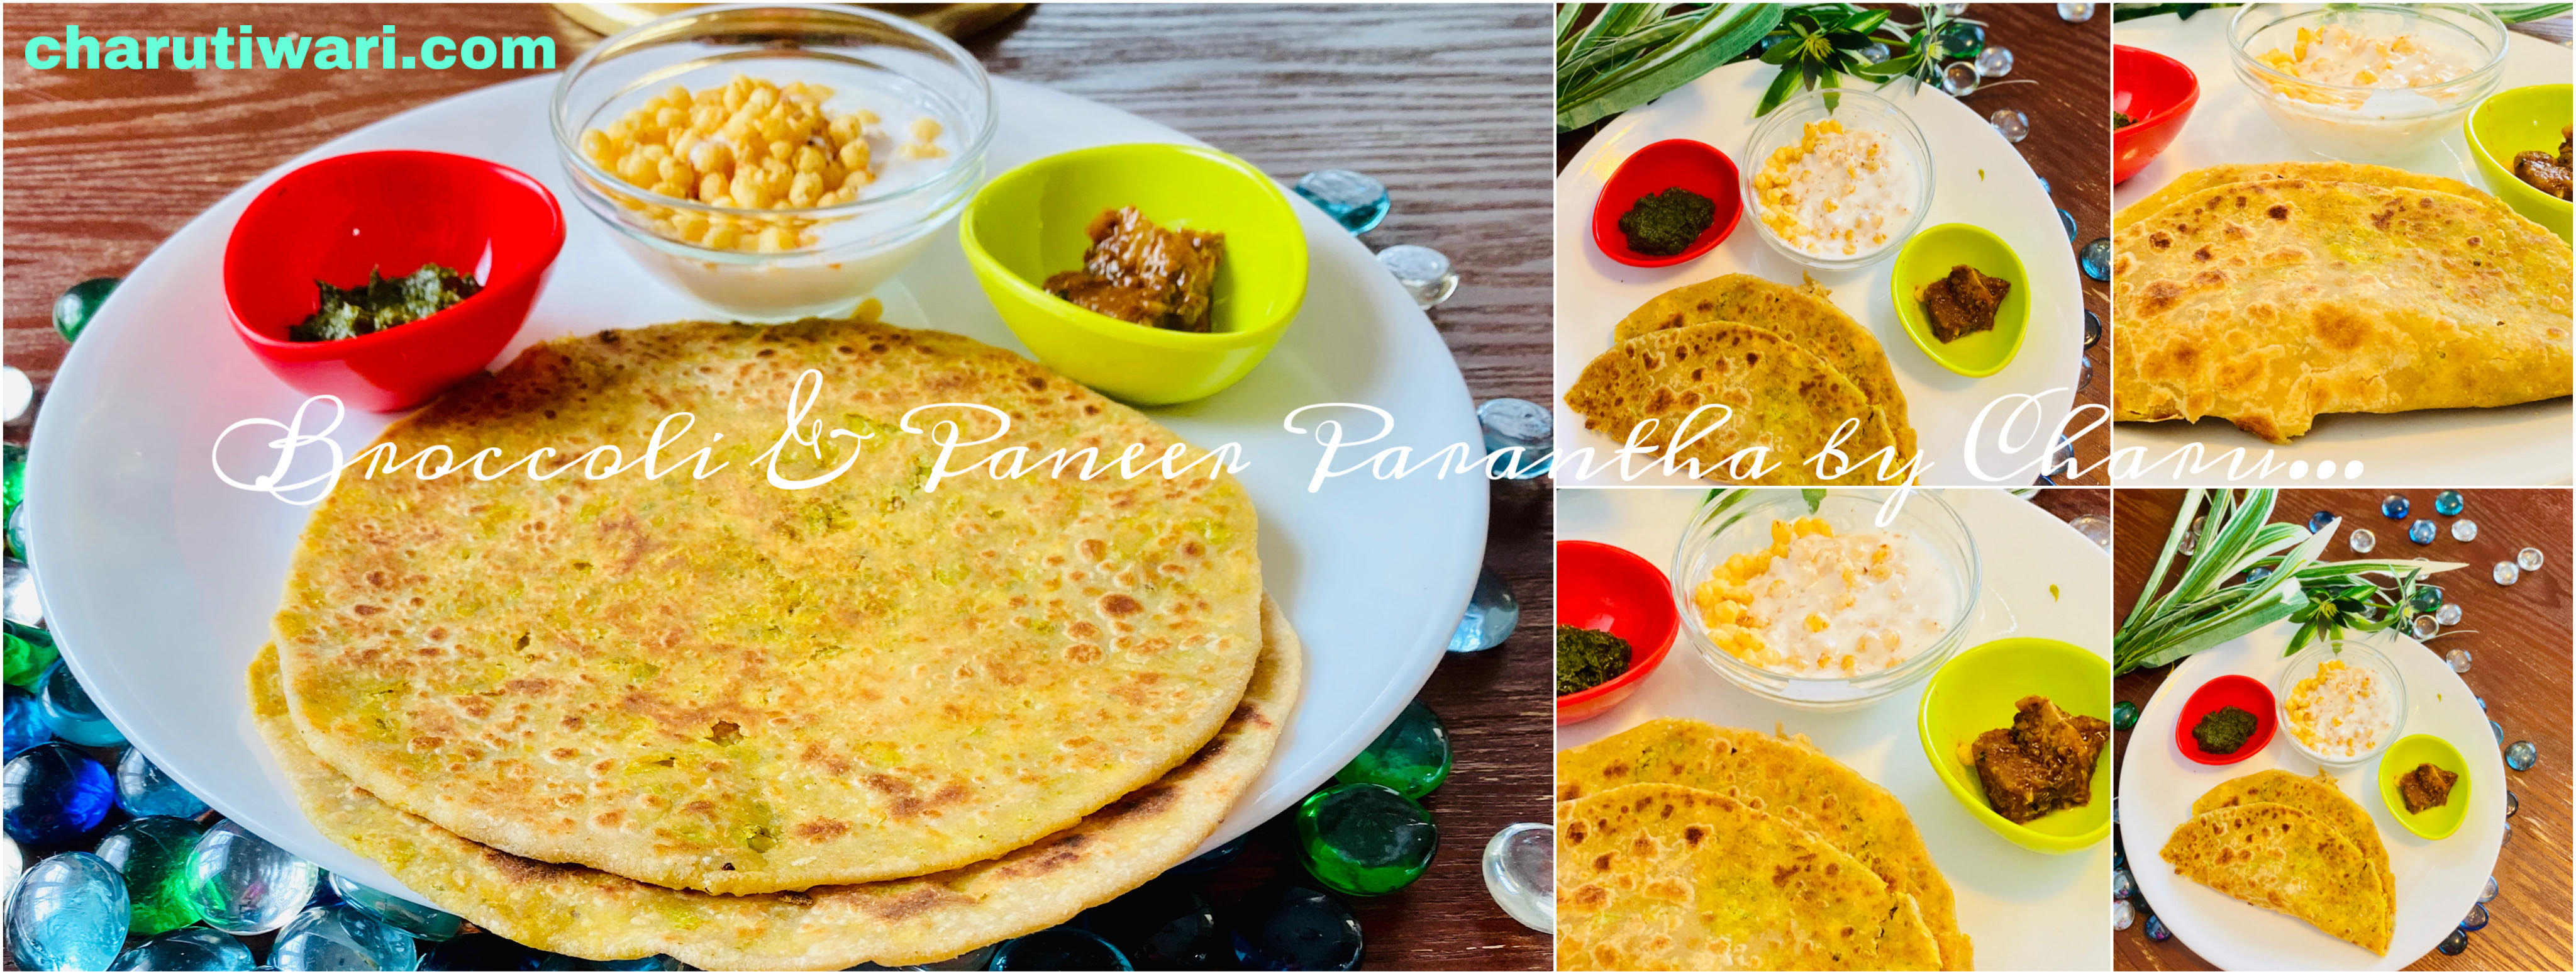 Broccoli and Paneer Parantha-Plated and served